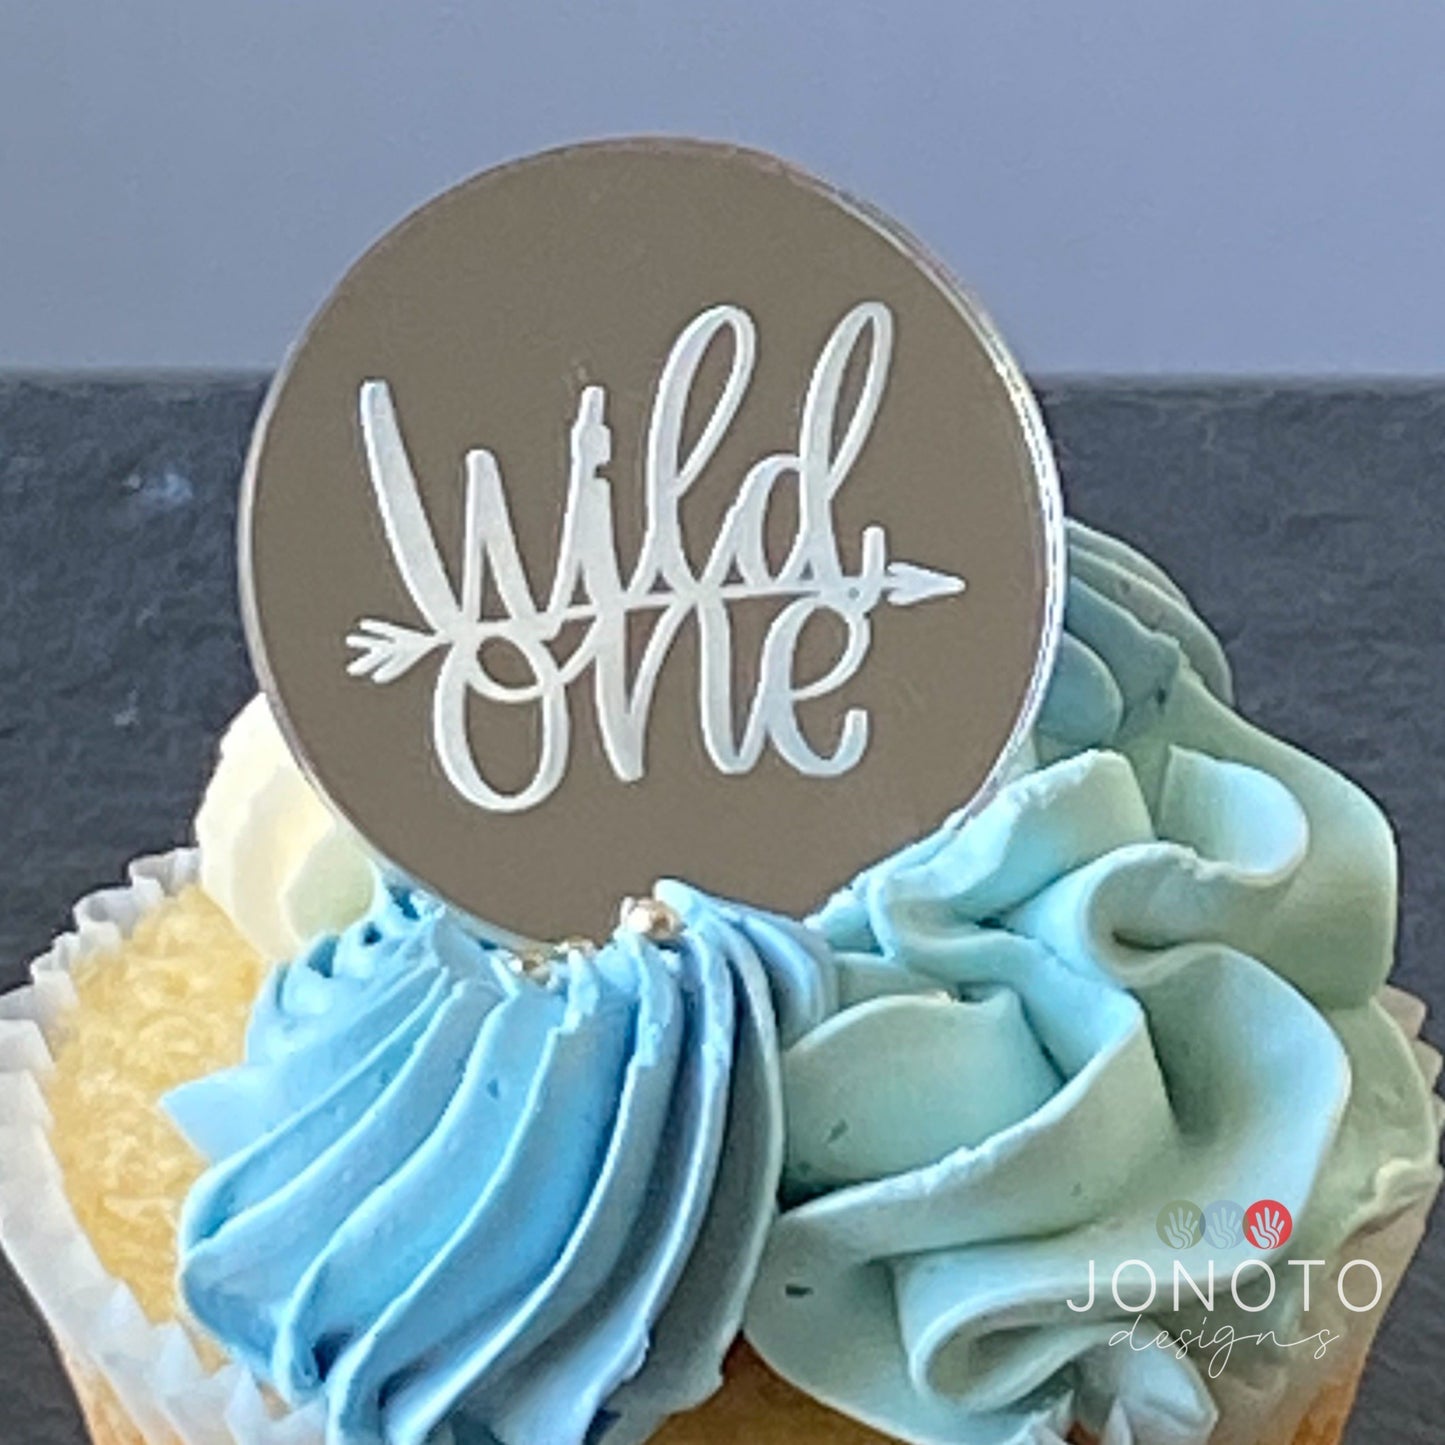 Cupcake Toppers | Wild One